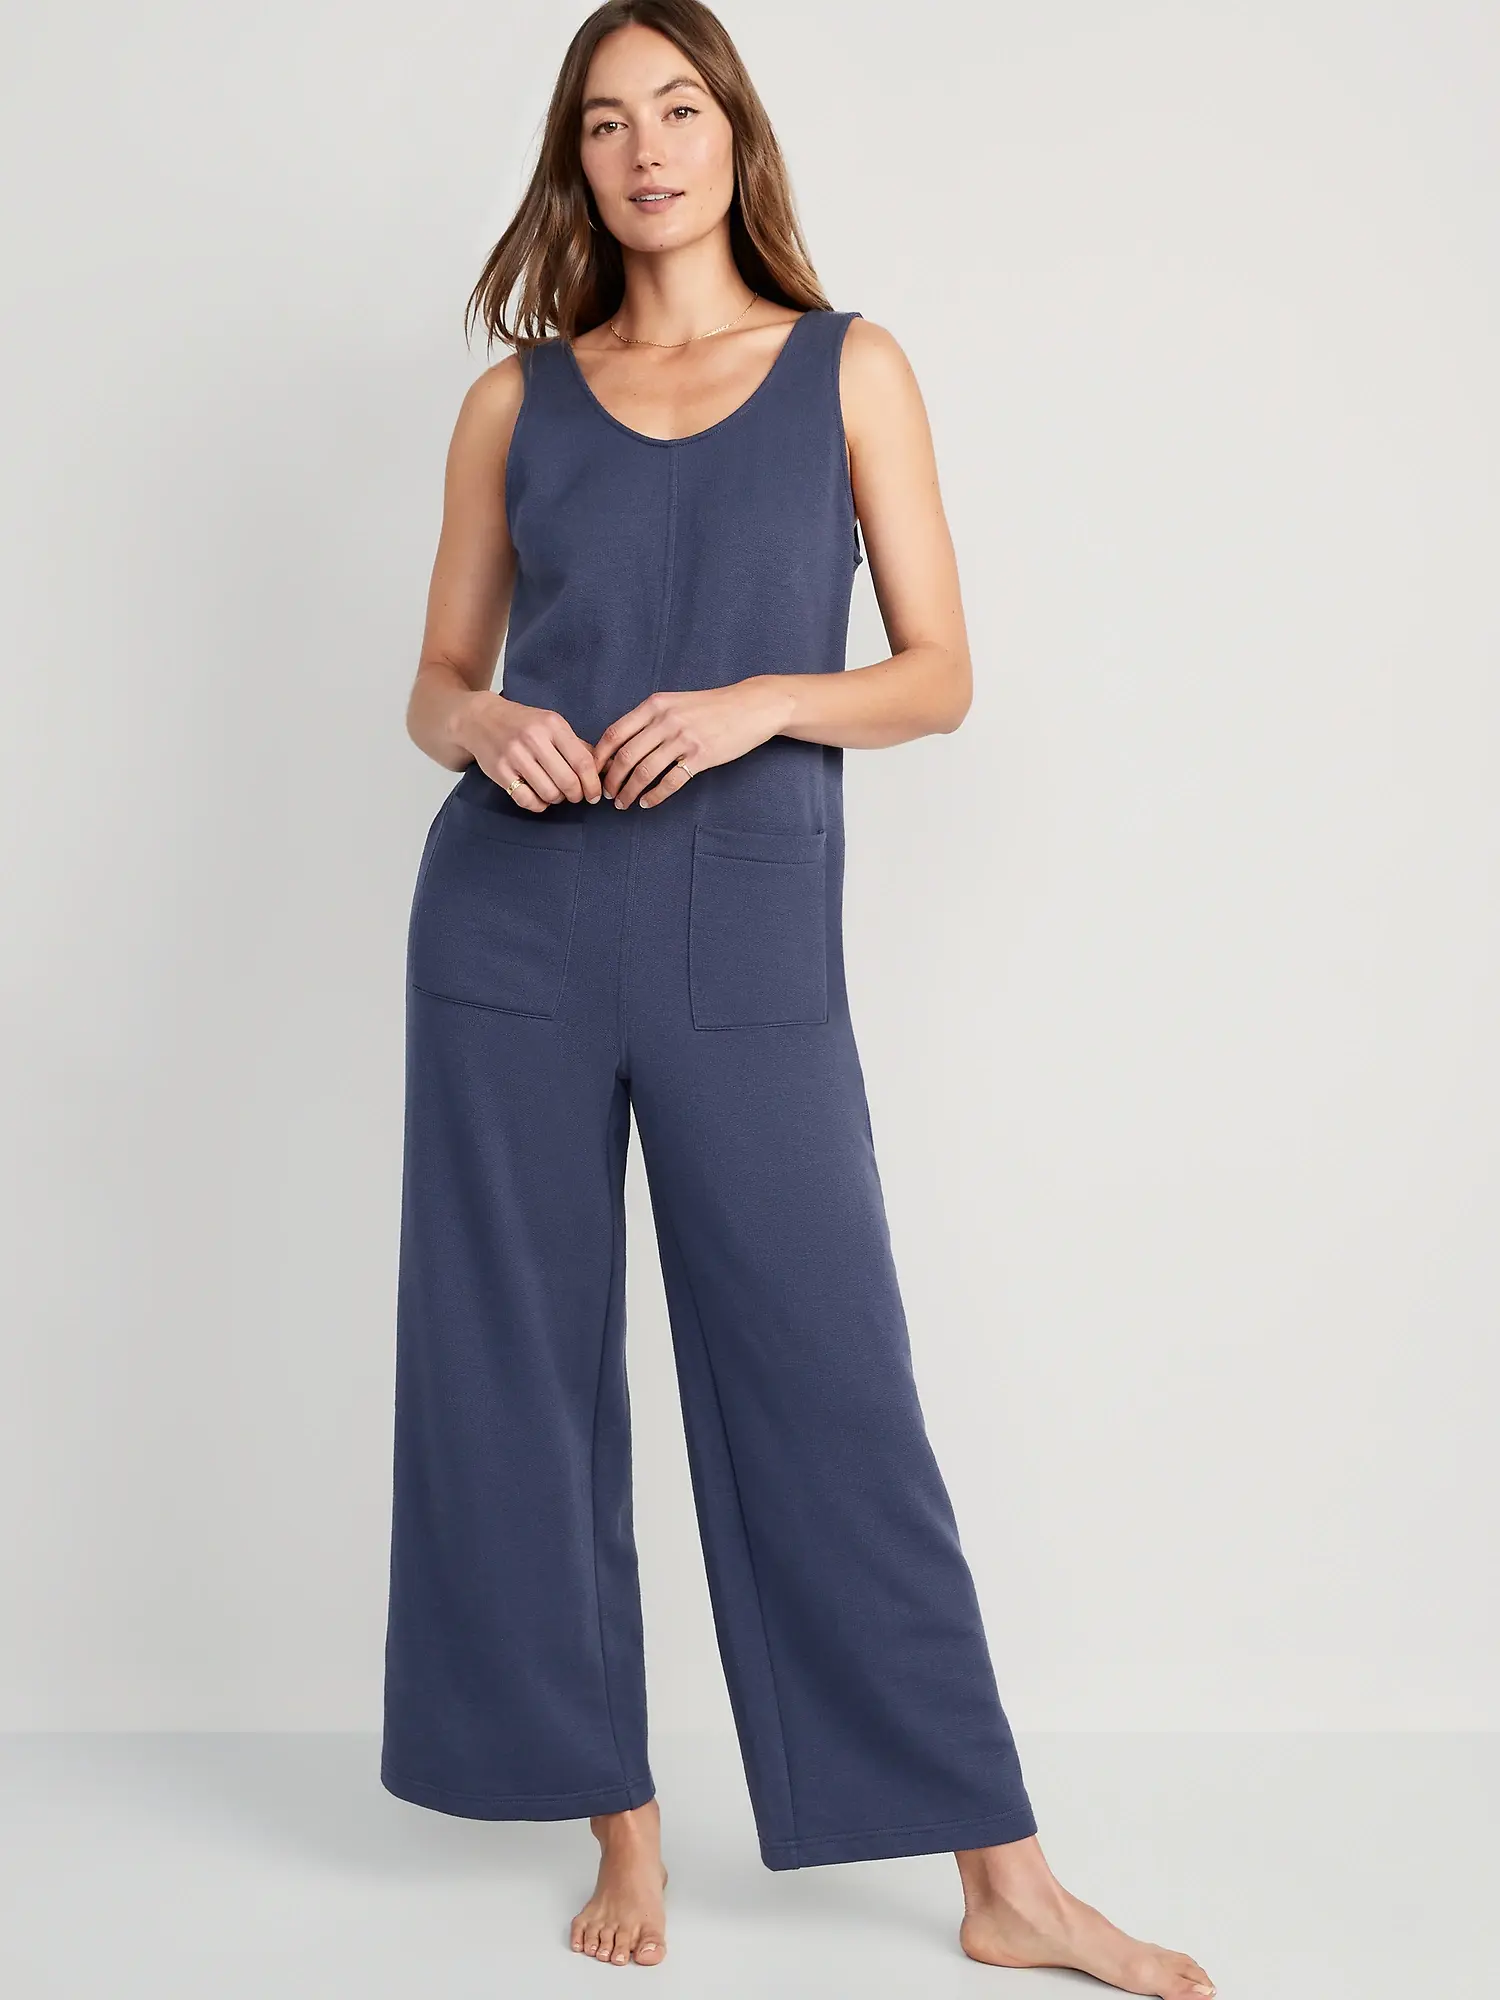 Old Navy Sleeveless Loose Marled Fleece Lounge Jumpsuit for Women blue. 1